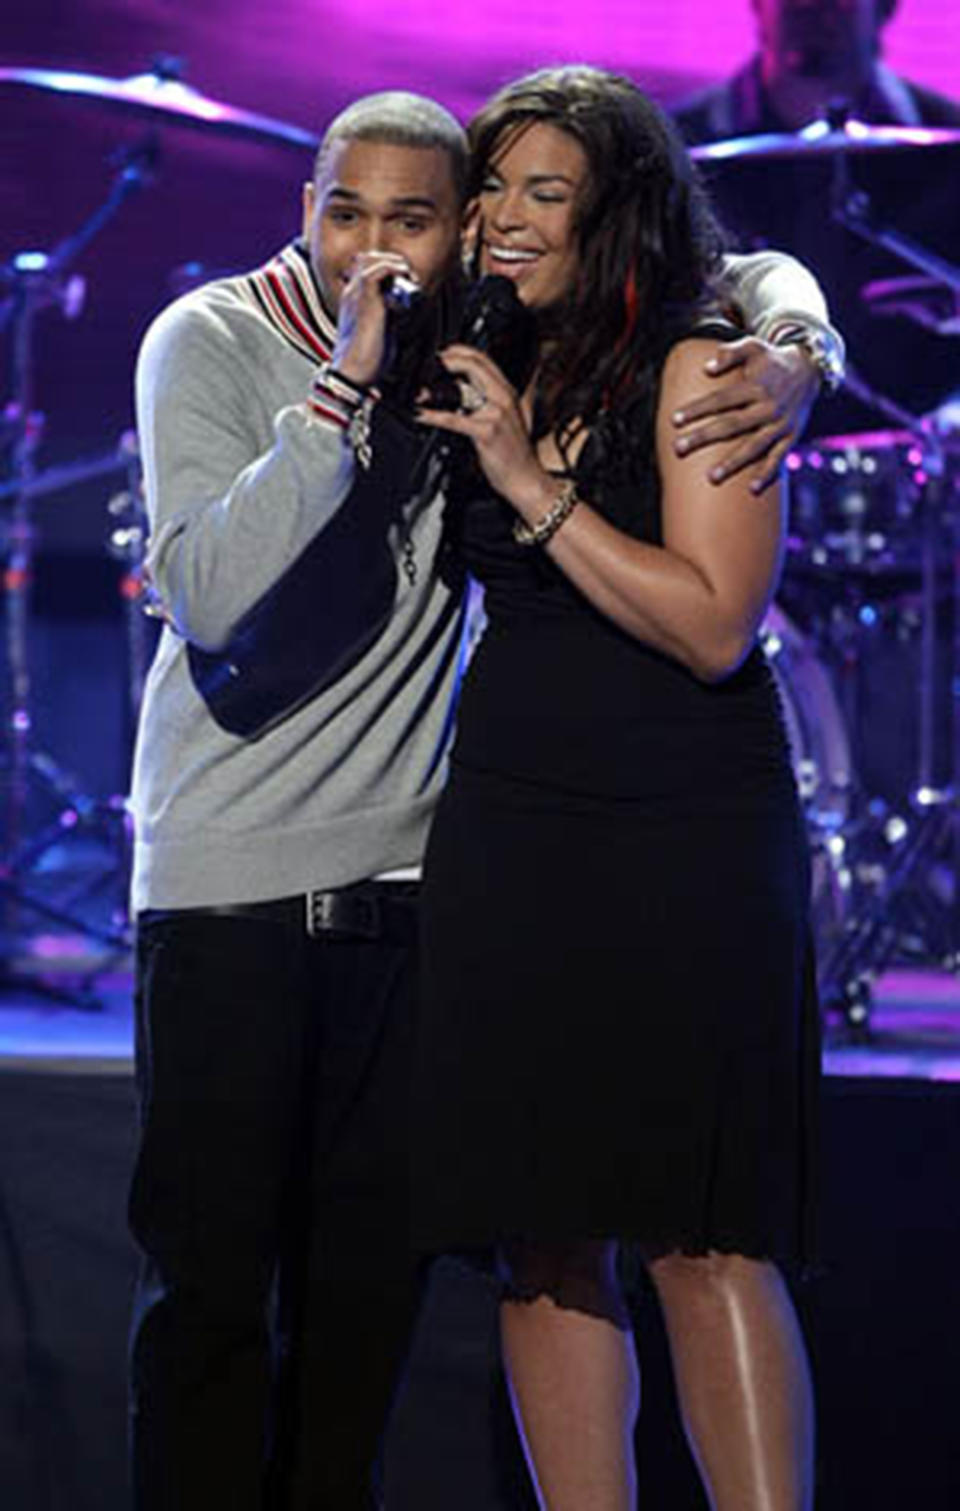 <p>In 2009, Sparks scored her first Grammy nomination — Best Pop Collaboration with Vocals — for her duet with Chris Brown, "No Air." The young stars didn't win, though did earn BET, Teen Choice, People's Choice and BMI Pop awards for the track.</p>